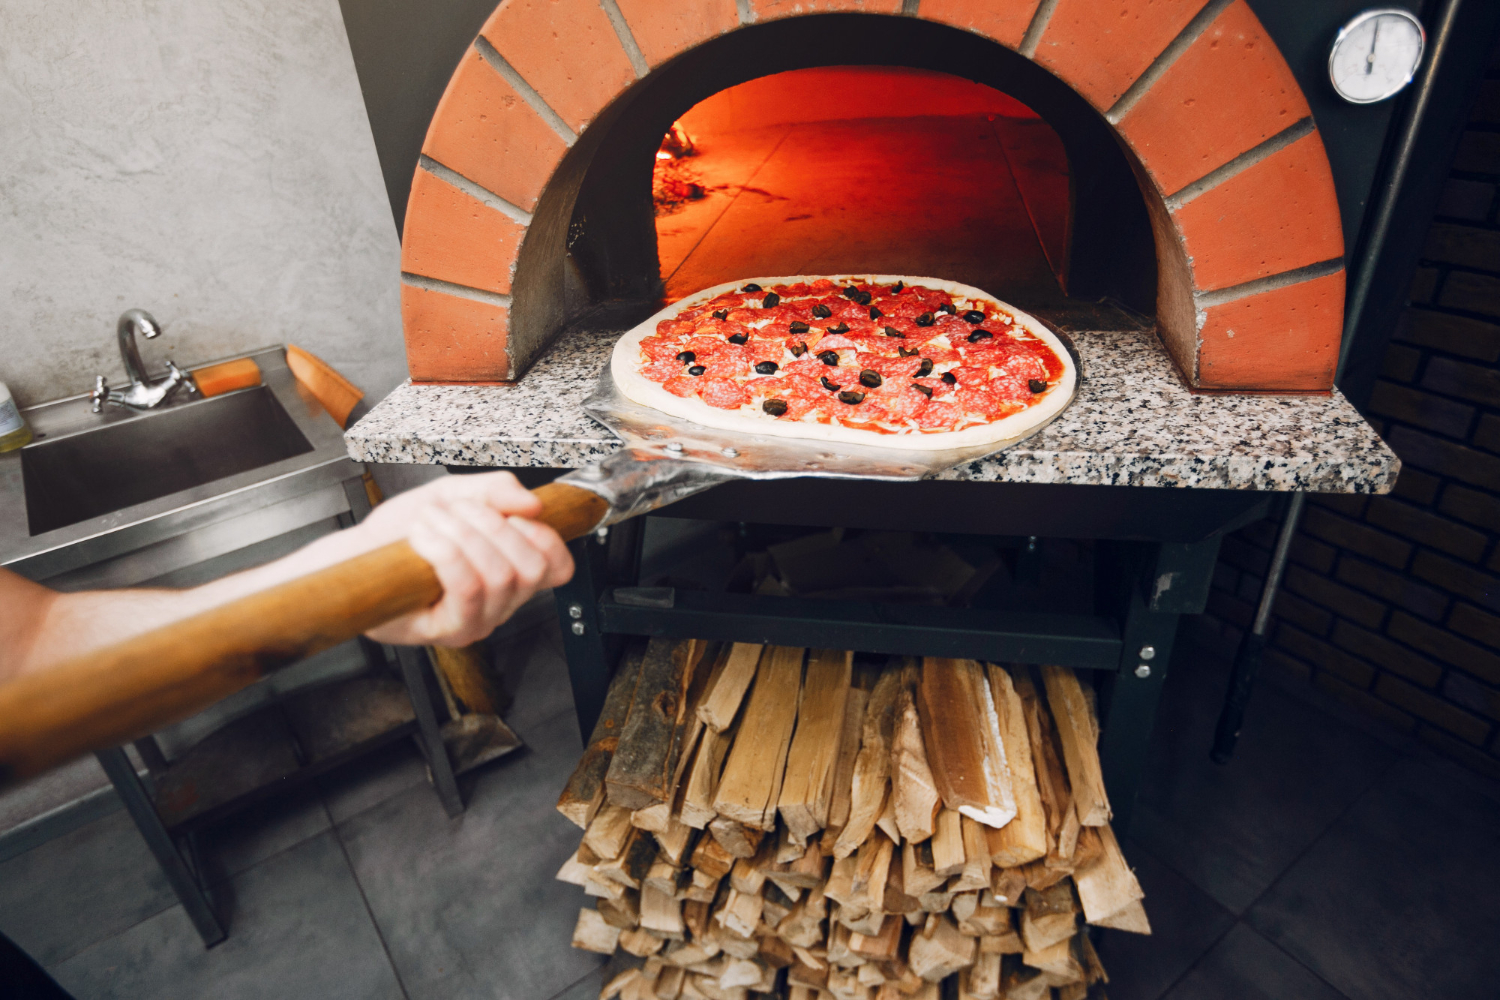 Chef putting pizza in pizza ovens